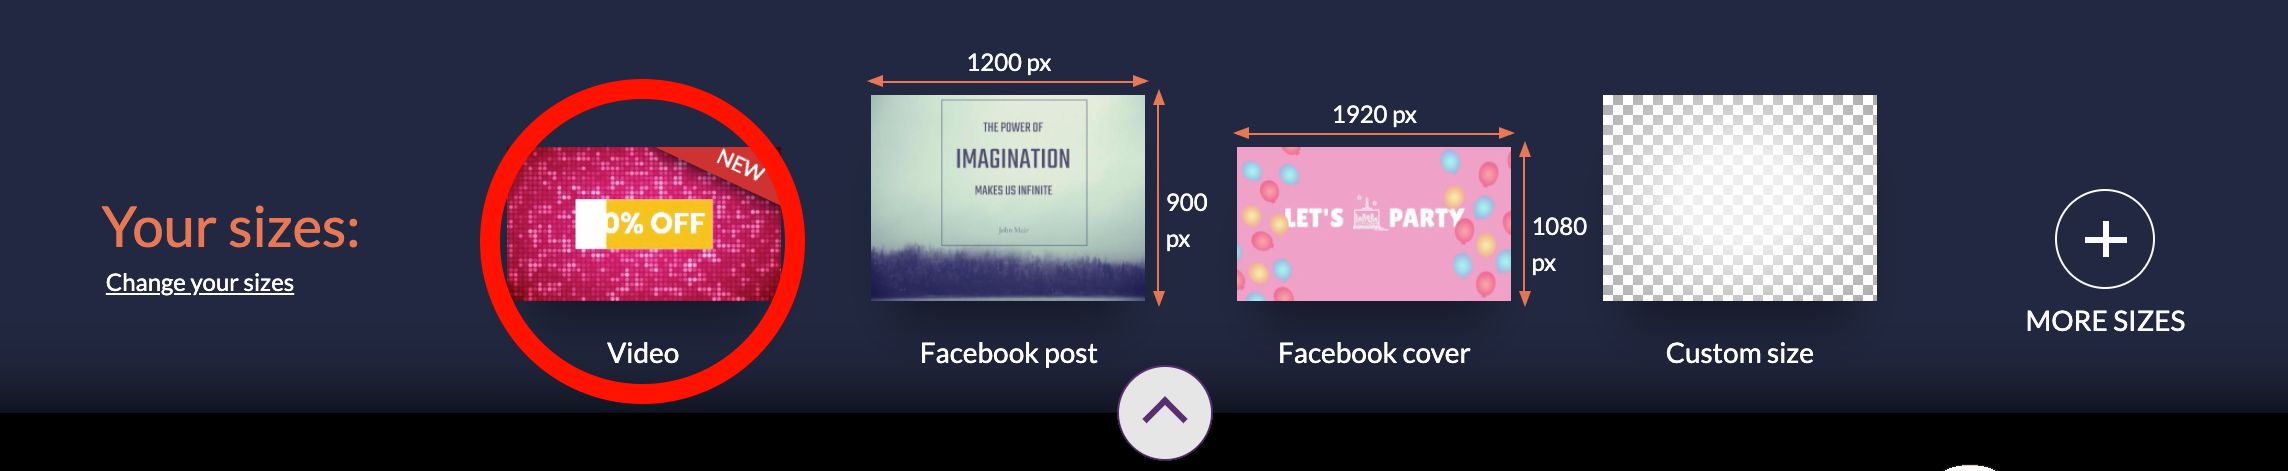 Step 2 Start with a Blank Video Canvas - Guide on how to use Instagram video ads to grow your business - Image